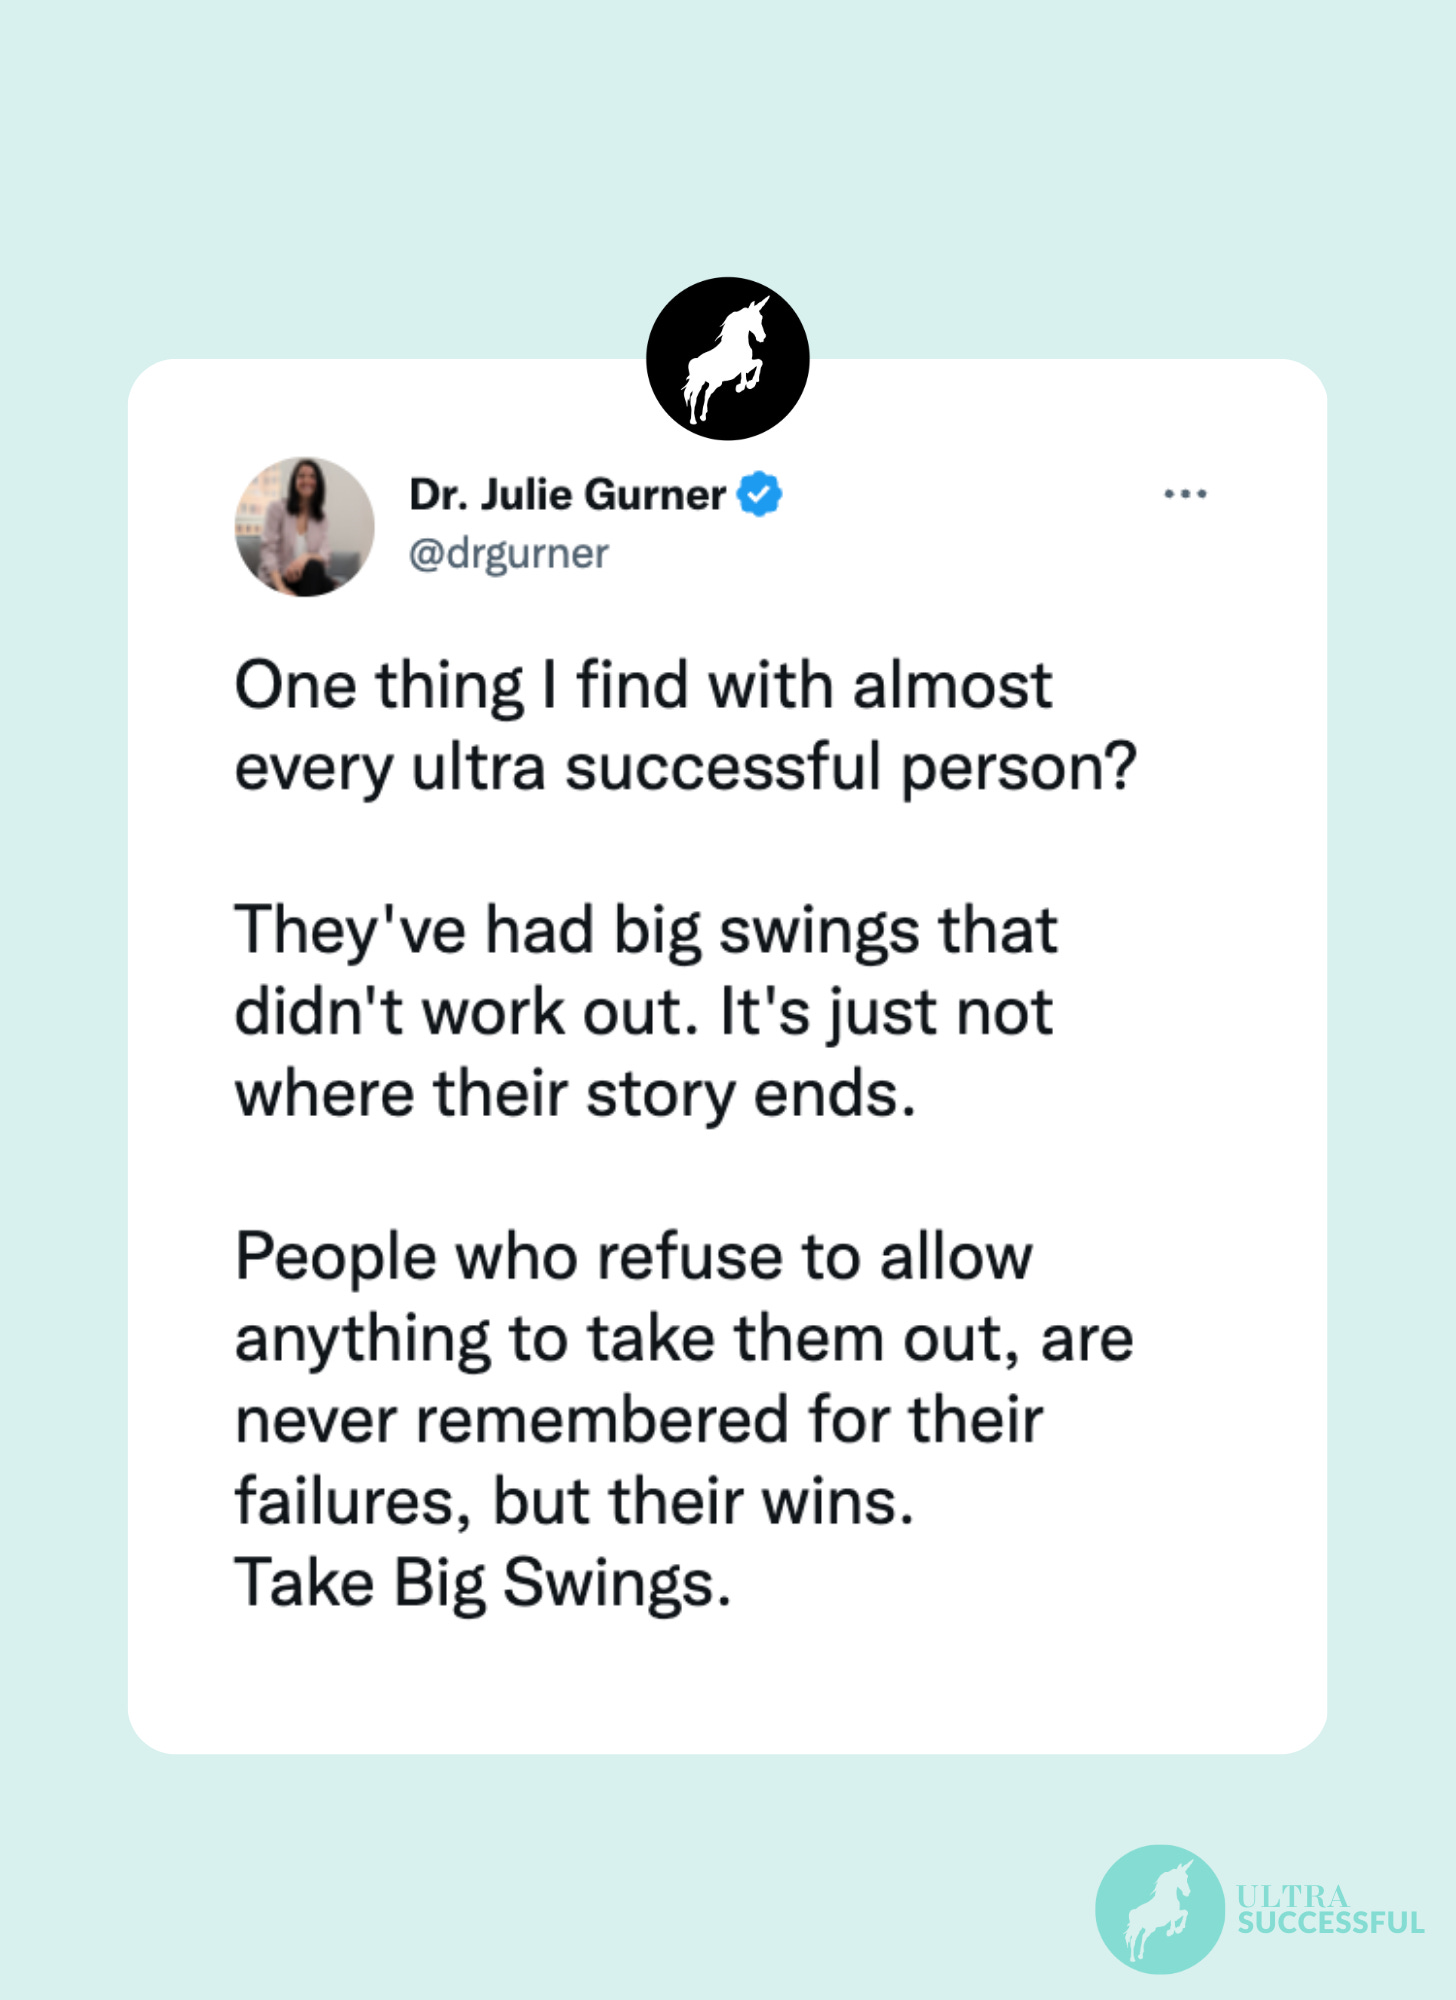 @drgurner: One thing I find with almost every ultra successful person?   They've had big swings that didn't work out. It's just not where their story ends.  People who refuse to allow anything to take them out, are never remembered for their failures, but their wins.  Take Big Swings.